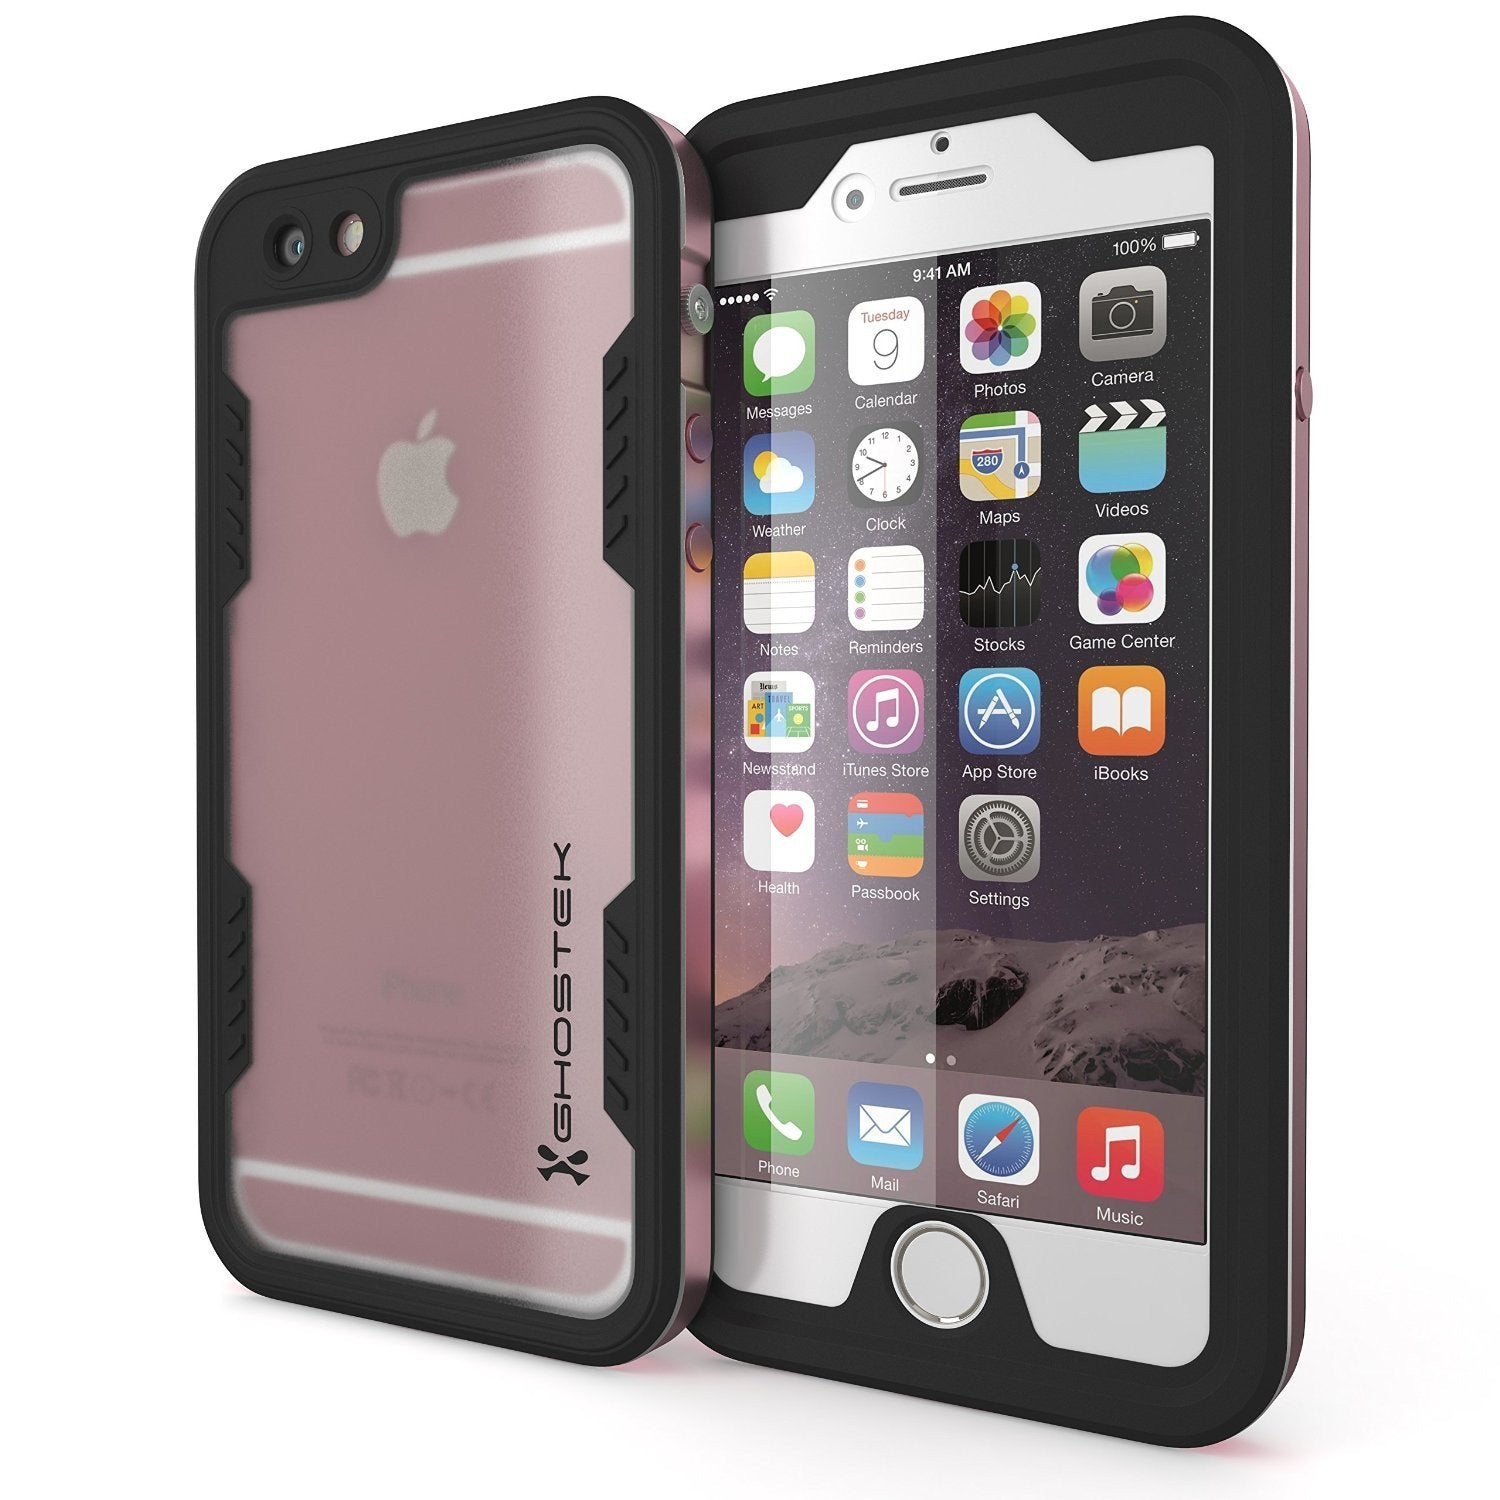 iPhone 6+/6S+ Plus Waterproof Case, Ghostek Atomic 2.0 Pink w/ Attached Screen Protector